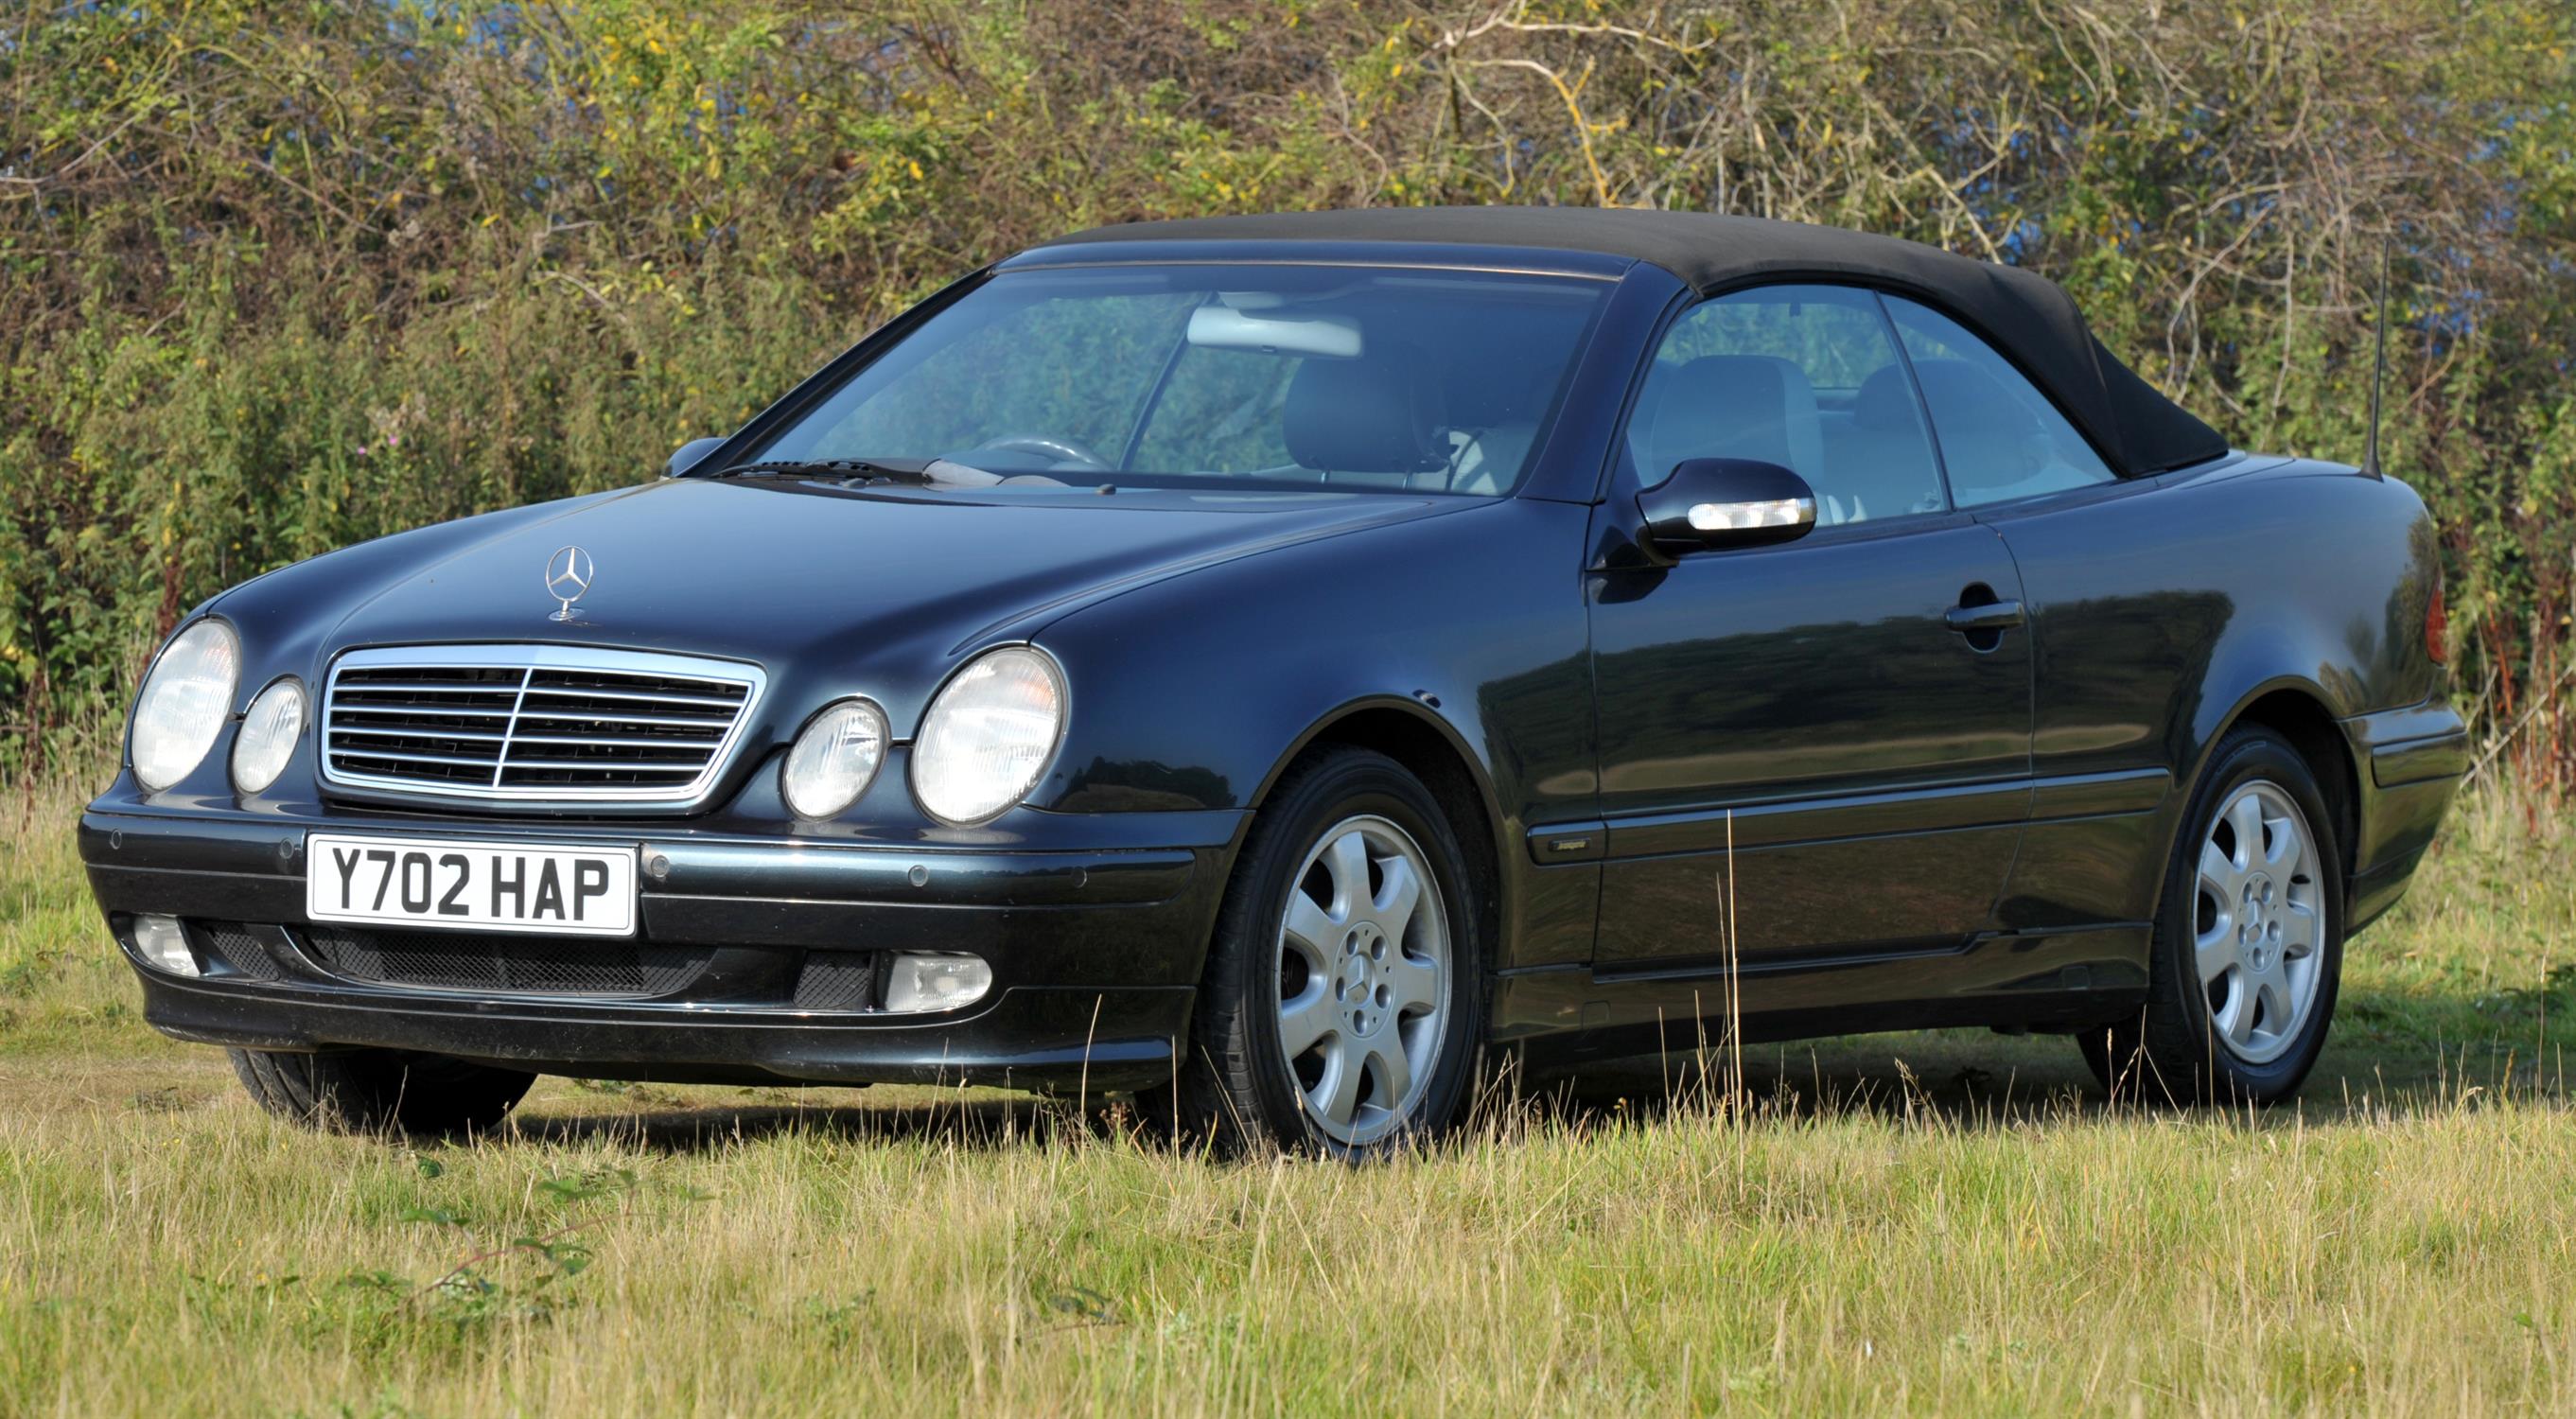 2001 Mercedes CLK 200 Petrol Convertible Automatic. Registration number: Y702 HAP. - Image 3 of 21